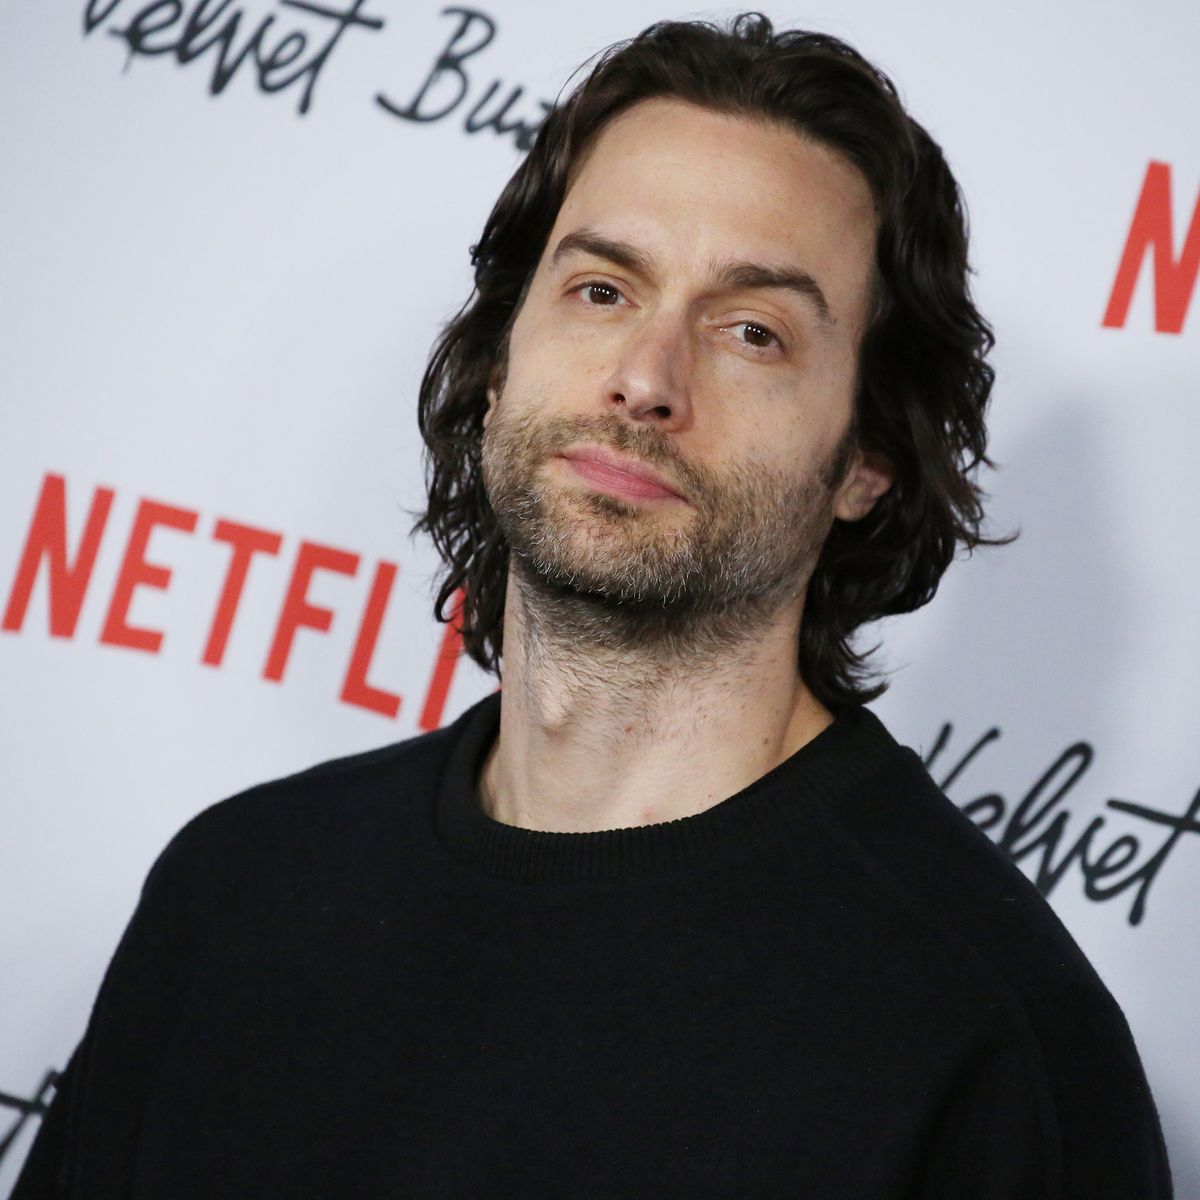 Naked girls that are underadge Chris D Elia Accused Of Soliciting Nudes From Underage Girls